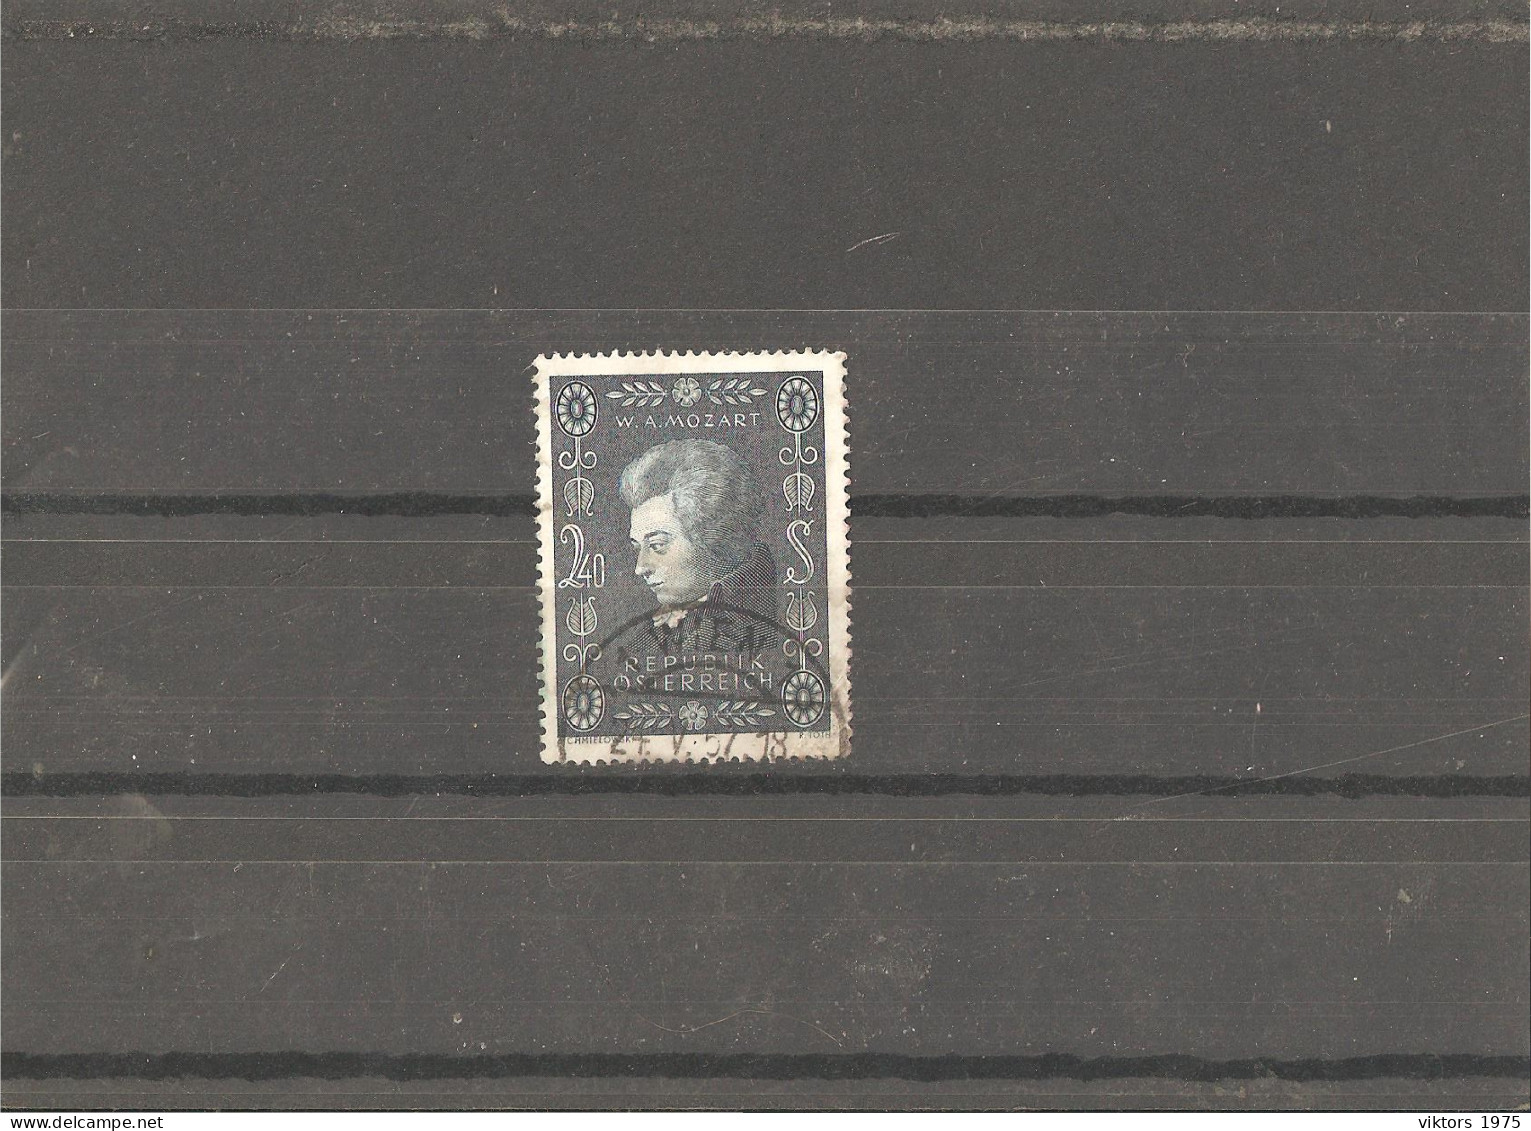 Used Stamp Nr.1024 In MICHEL Catalog - Used Stamps